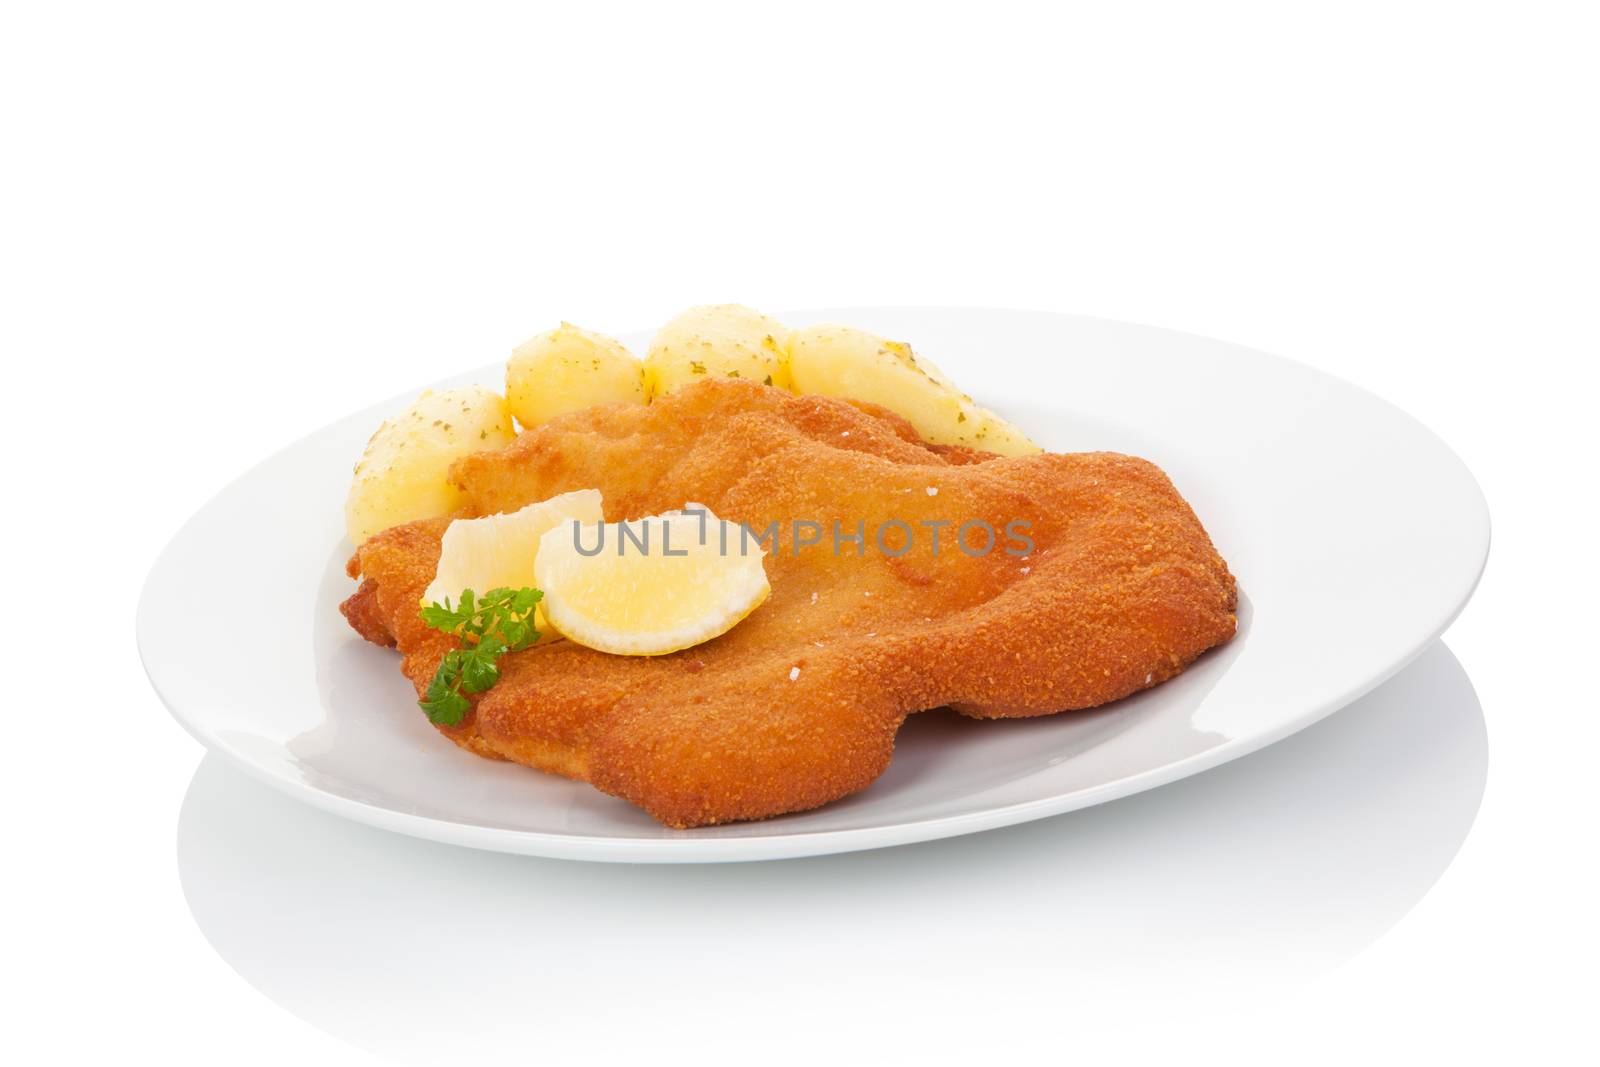 Delicious wiener schnitzel on plate isolated on white background with reflection. Traditional european cuisine.